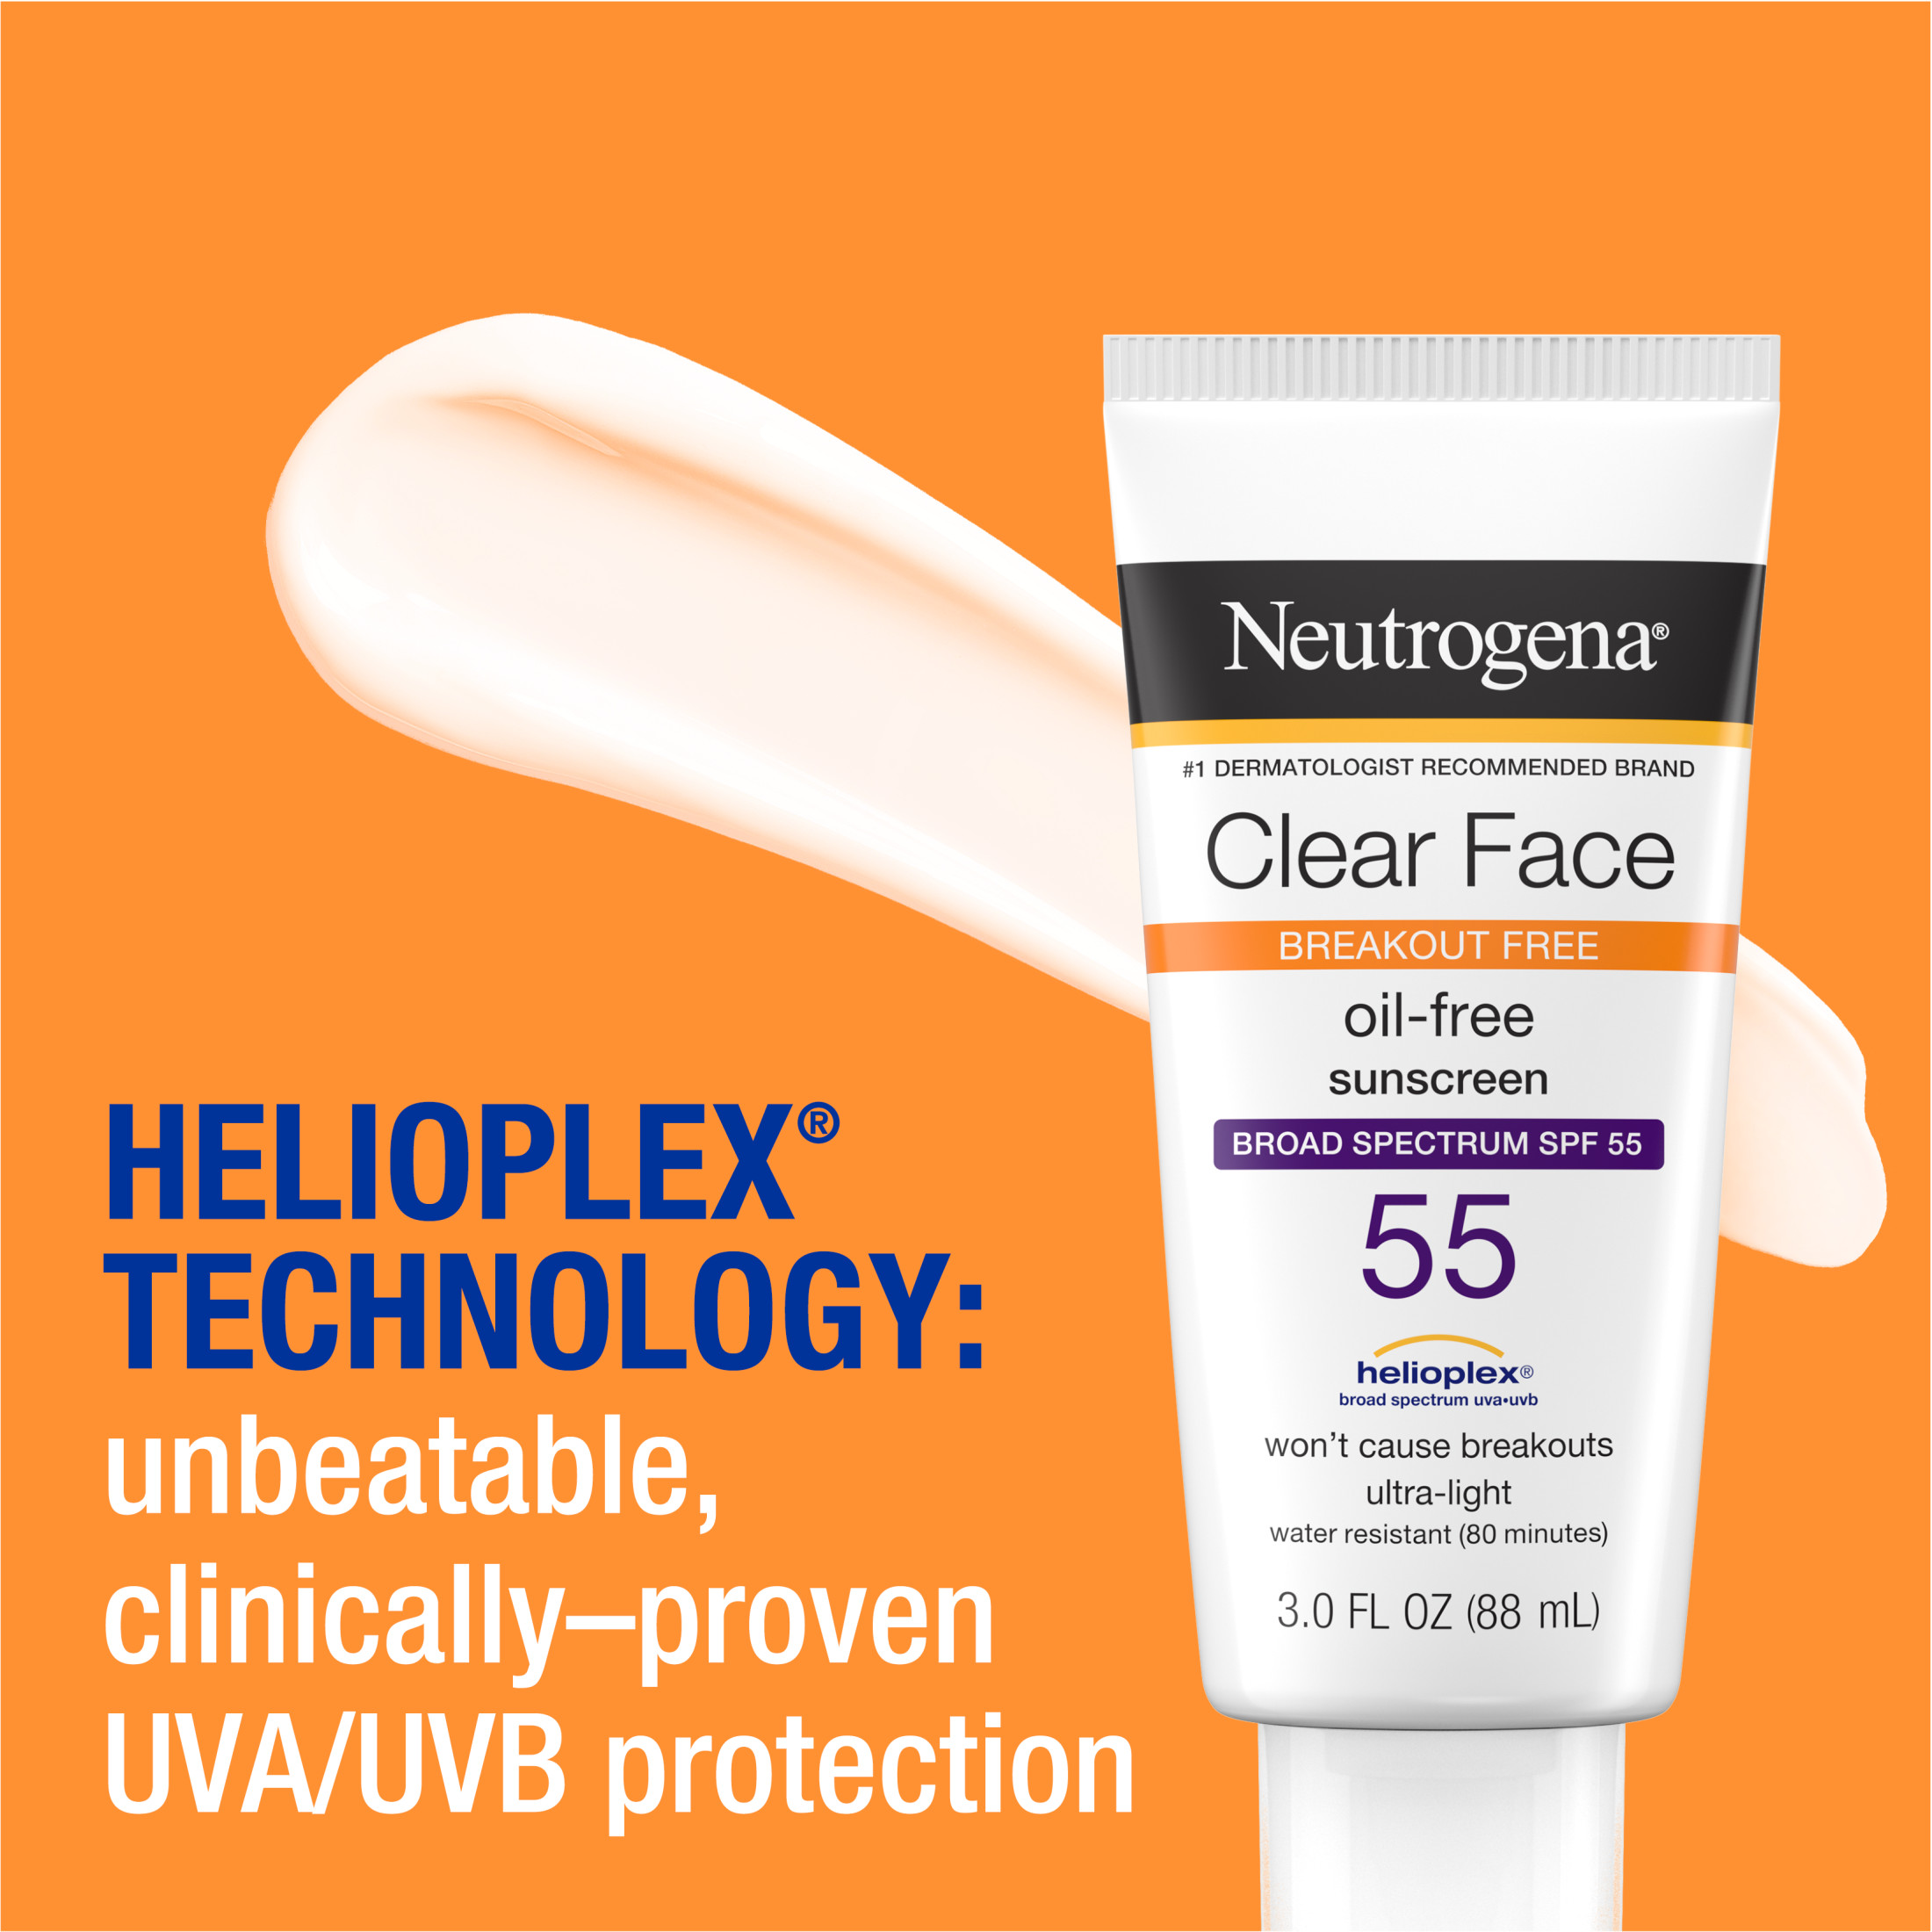 Neutrogena Clear Face Liquid Lotion Sunscreen with SPF 50, 3 fl. oz - image 5 of 16